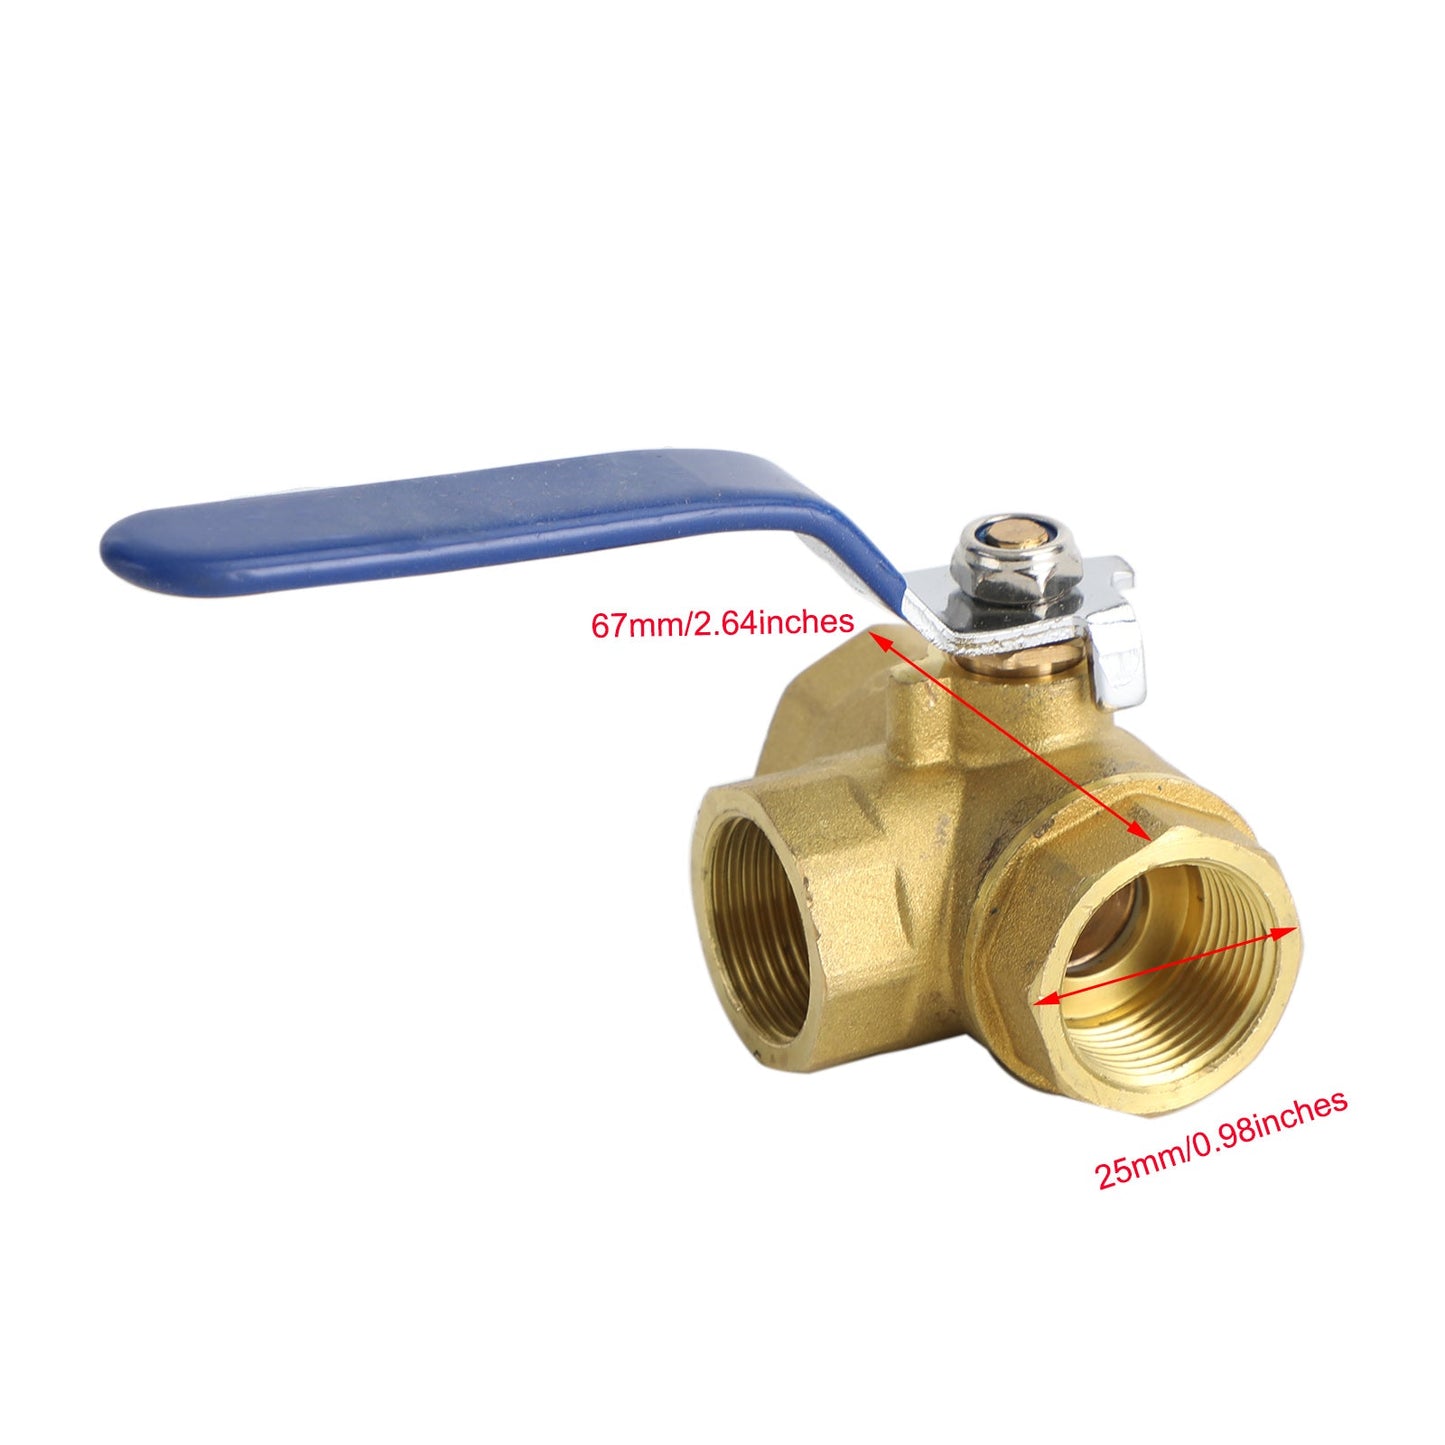 1/2" 3 Way Ball Valve Three T Port NPT Brass Female Type For Water Oil And Gas